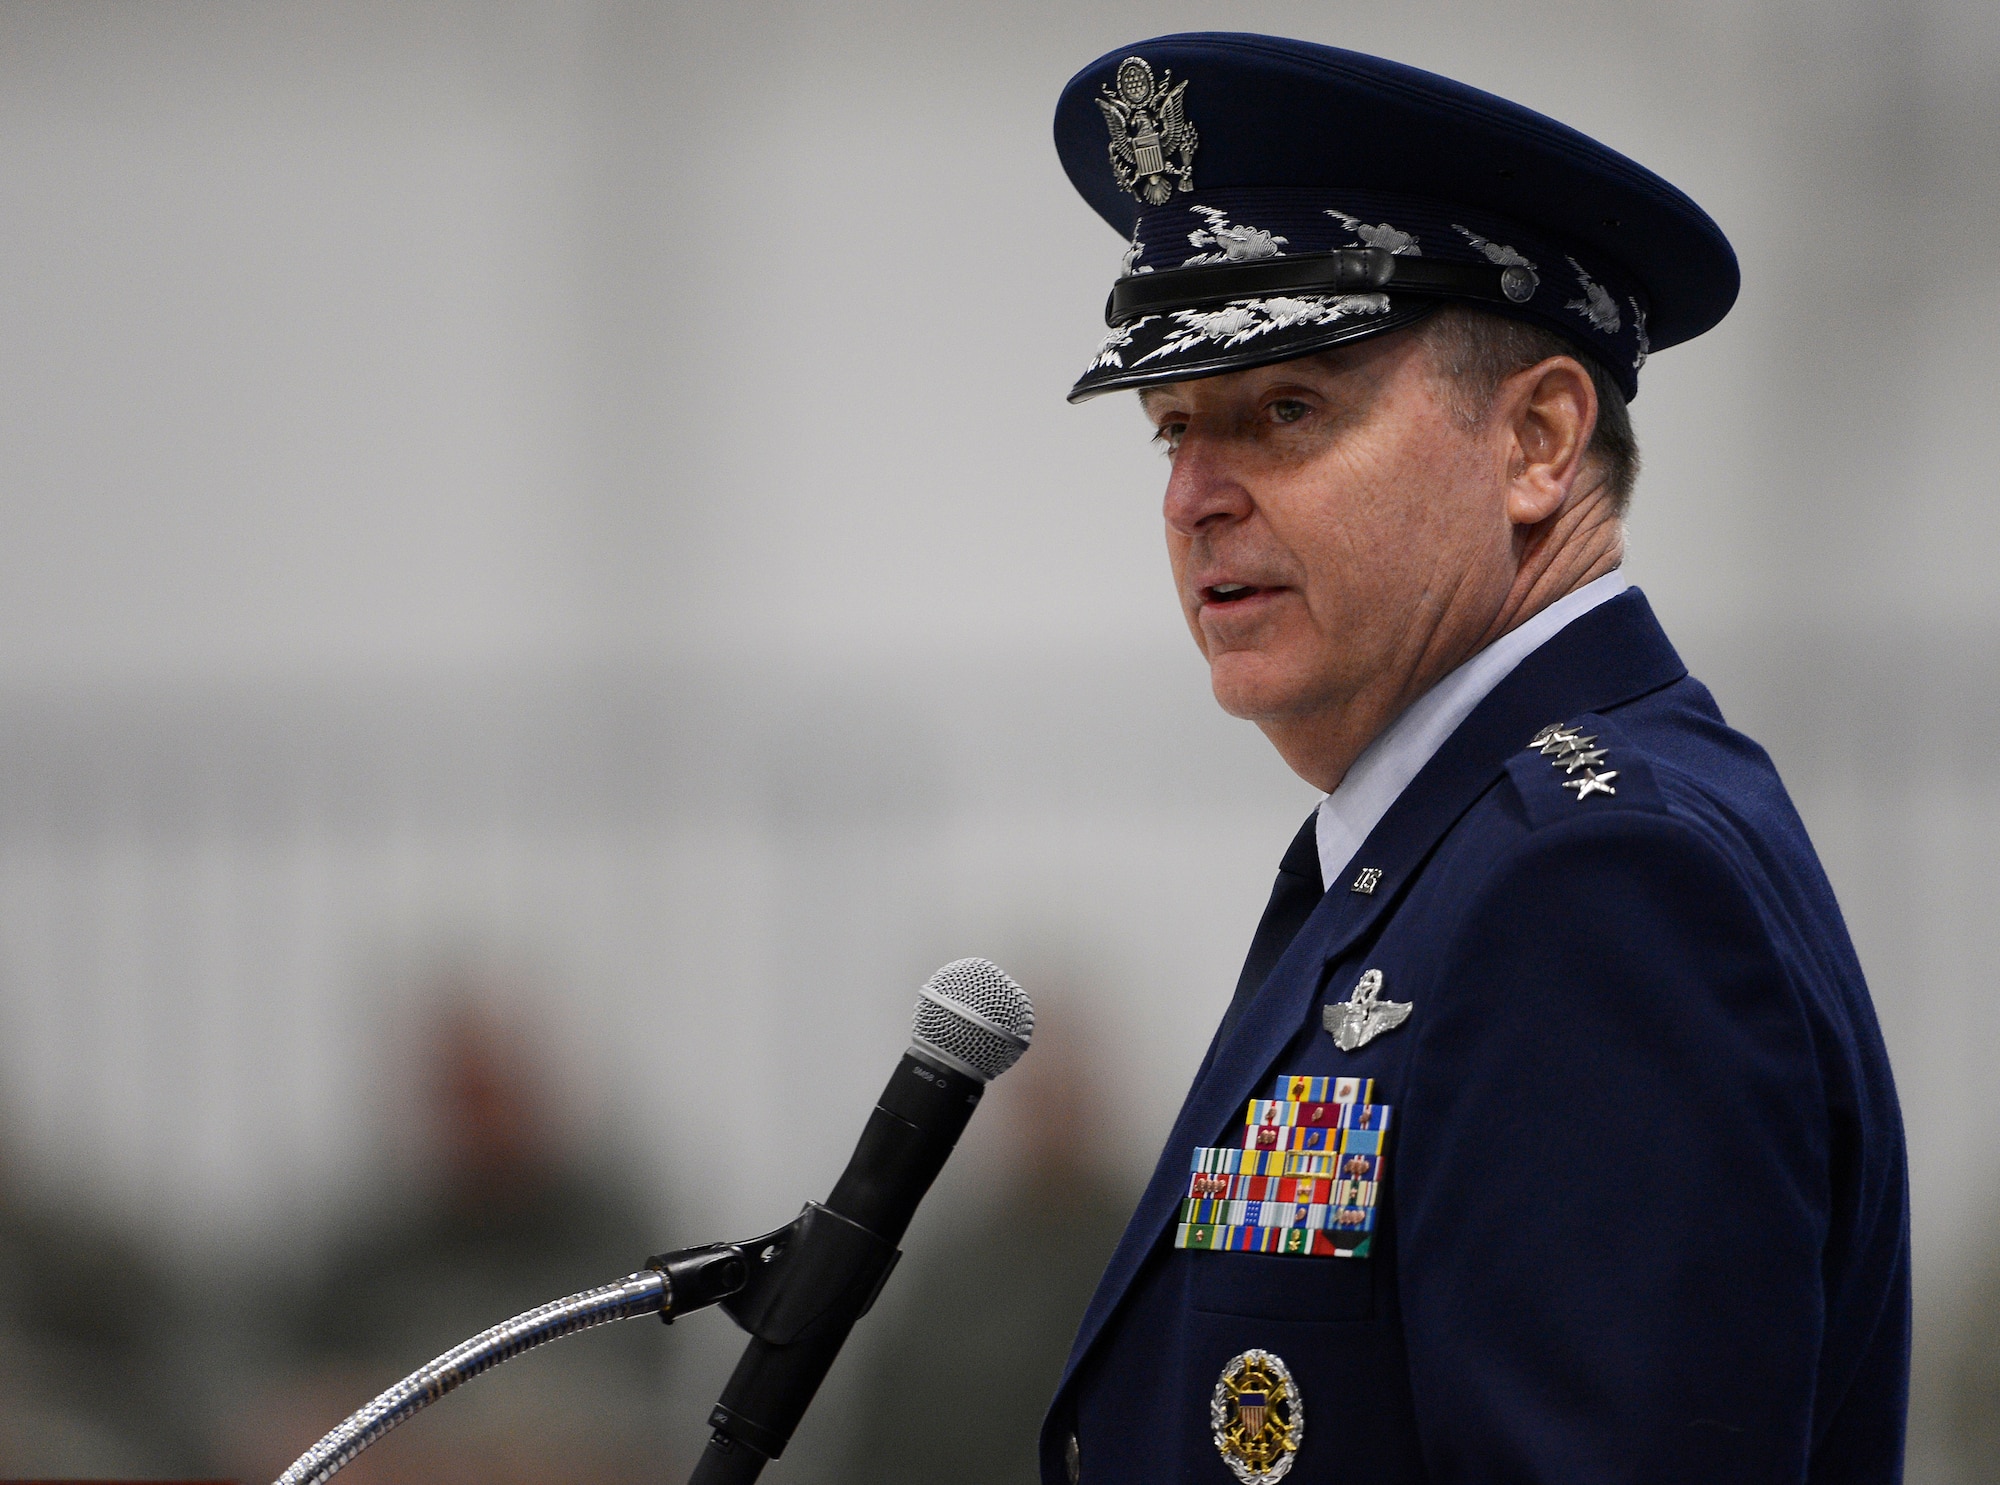 Air Force Chief of Staff Gen. Mark A. Welsh III expresses his thanks for the 30 years of service of Chief Master Sgt. of the Air Force James Roy during Roy's retirement ceremony on Joint Base Andrews, Md. on Jan. 24, 2013. Welsh also welcomed Chief Master Sgt. James Cody as he transitions into becoming the 17th Chief Master Sgt. of the Air Force. Roy, the 16th Chief Master Sgt. of the Air Force, is retiring after more than 30 years of service. (U.S. Air Force photo/Jim Varhegyi)